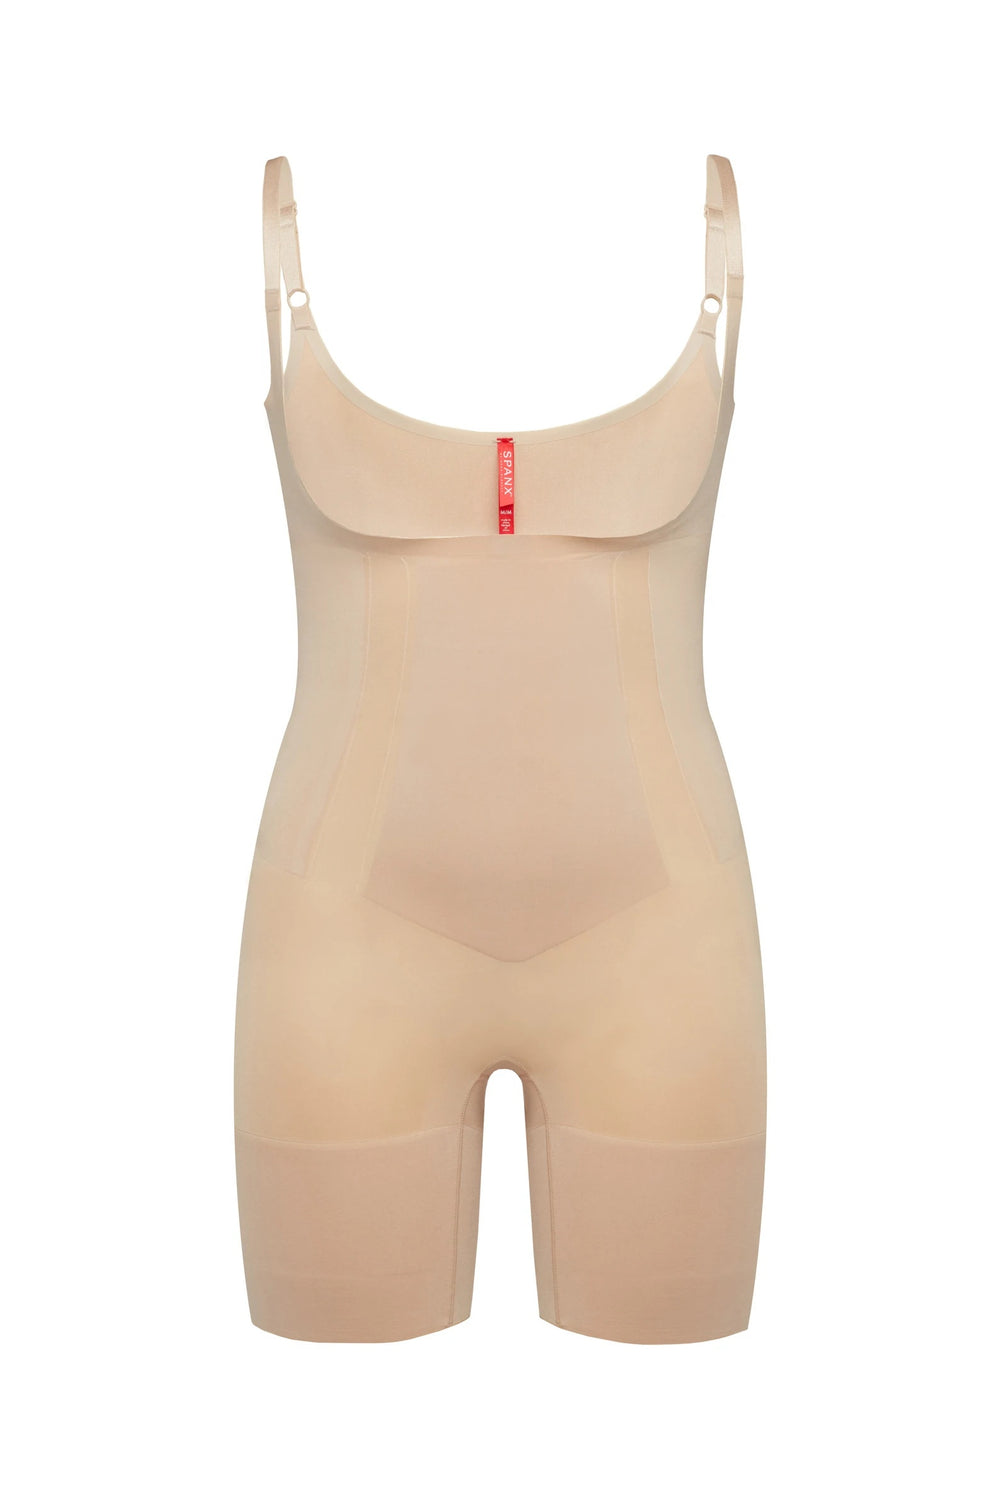 SPANX ONCORE OPEN-BUST MID-THIGH BODYSUIT SOFT NUDE